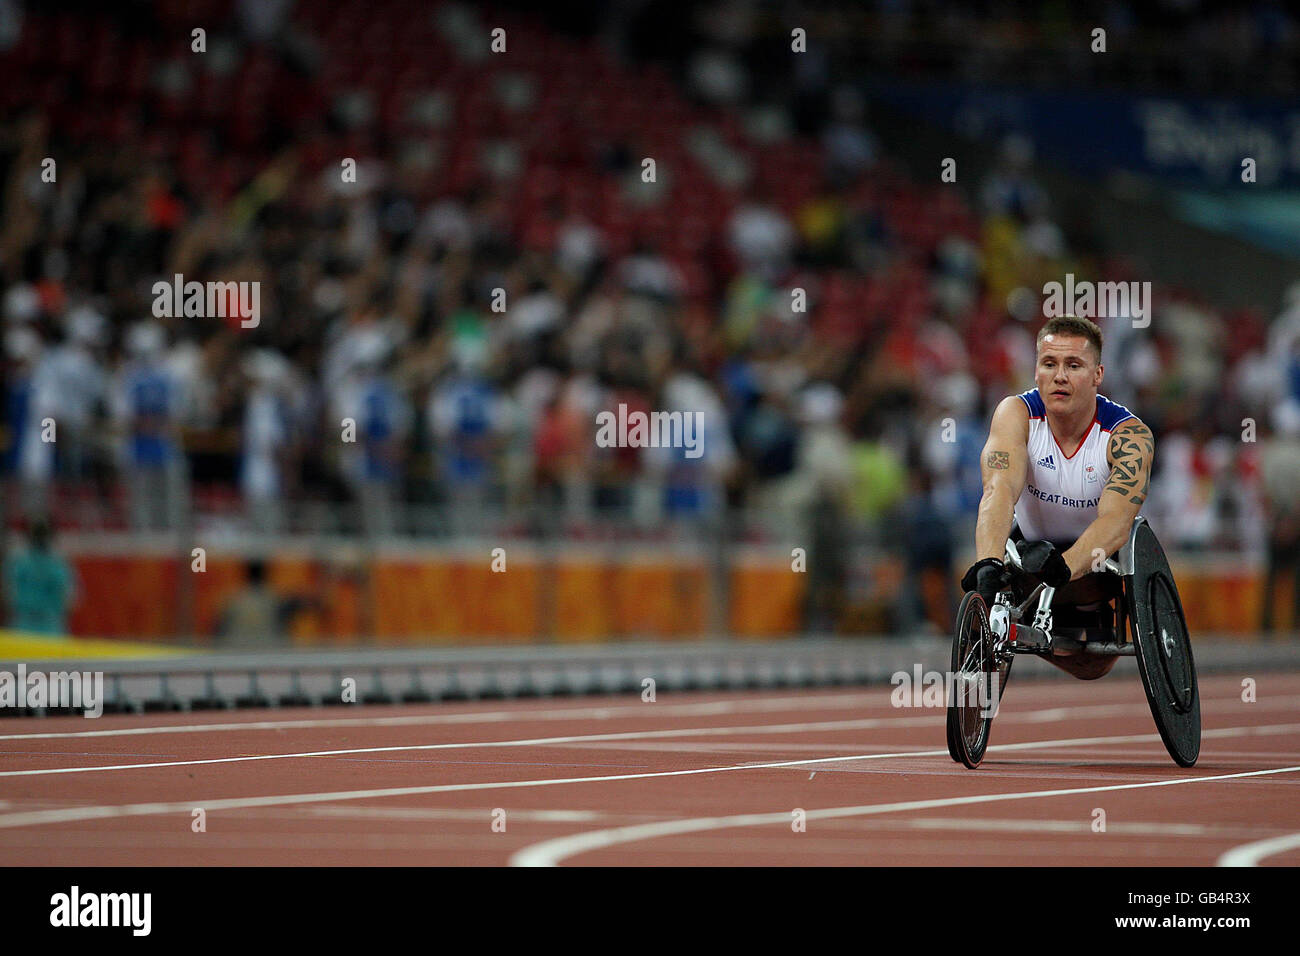 Great Britain's David Weir appears dejected after finishing his men's 400M Final in the National Stadium at the Beijing Paralympic Games 2008, China. Stock Photo